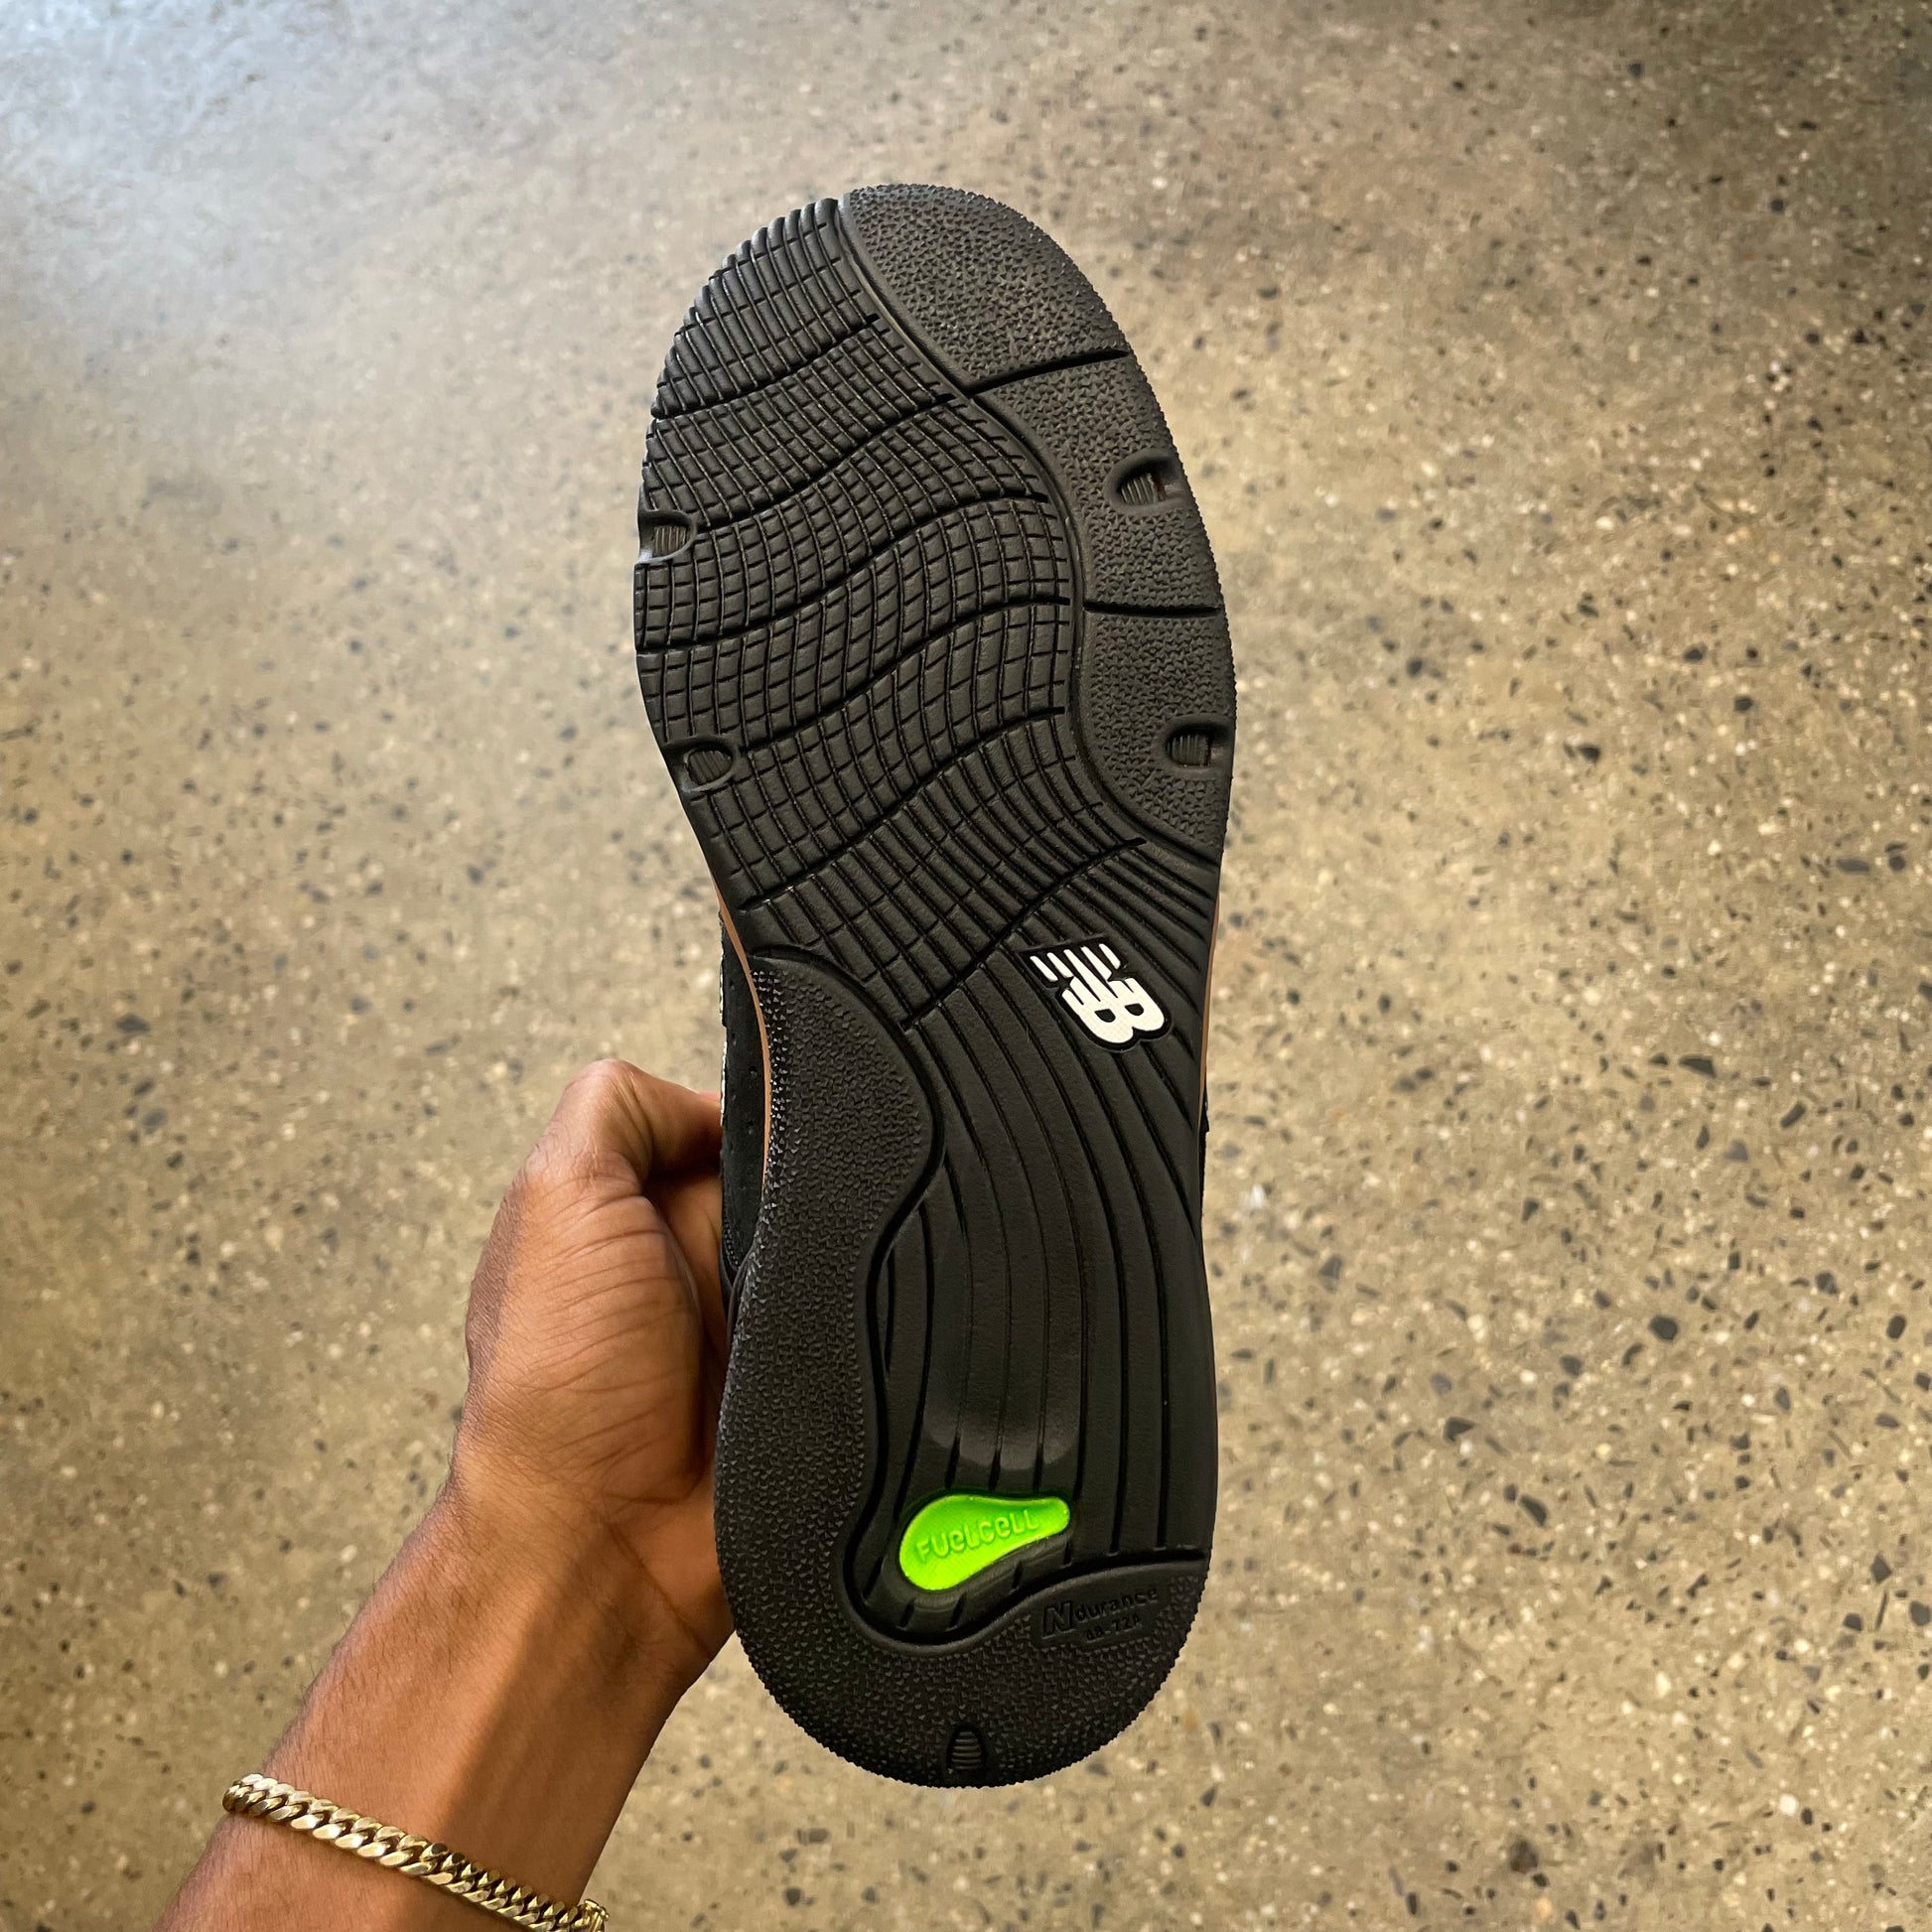 black and green sole, bottom of sneaker